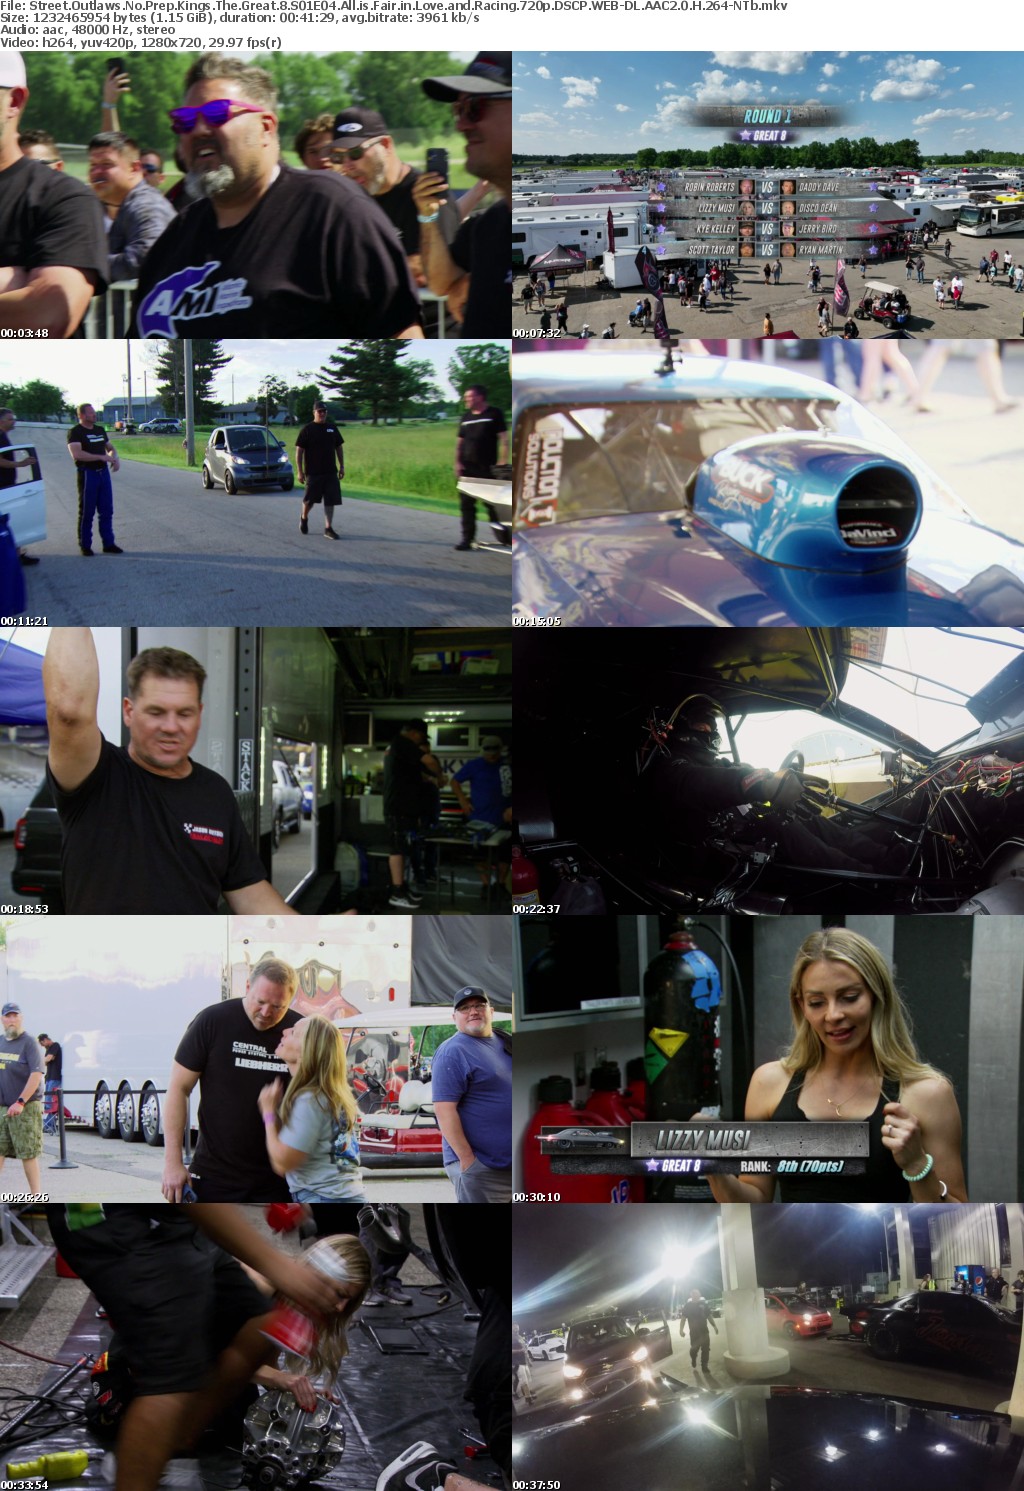 Street Outlaws No Prep Kings The Great 8 S01E04 All is Fair in Love and Racing 720p DSCP WEB-DL AAC2 0 H 264-NTb